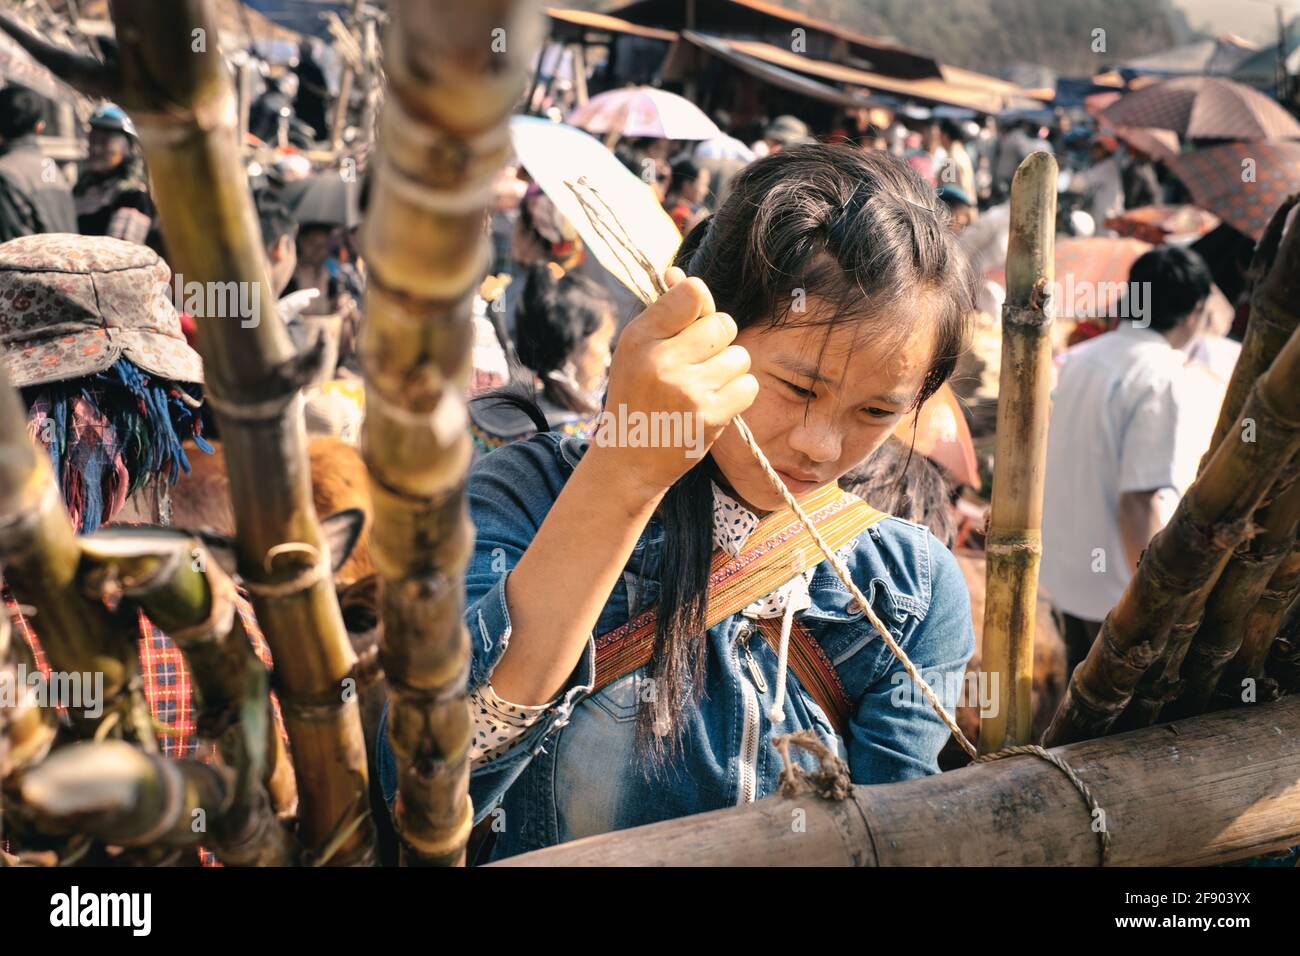 Bac Ha, Vietnam - April 4, 2016: Young Hmong tribe girl make traditional crafts at Can Cau Saturday market in Vietnam Stock Photo